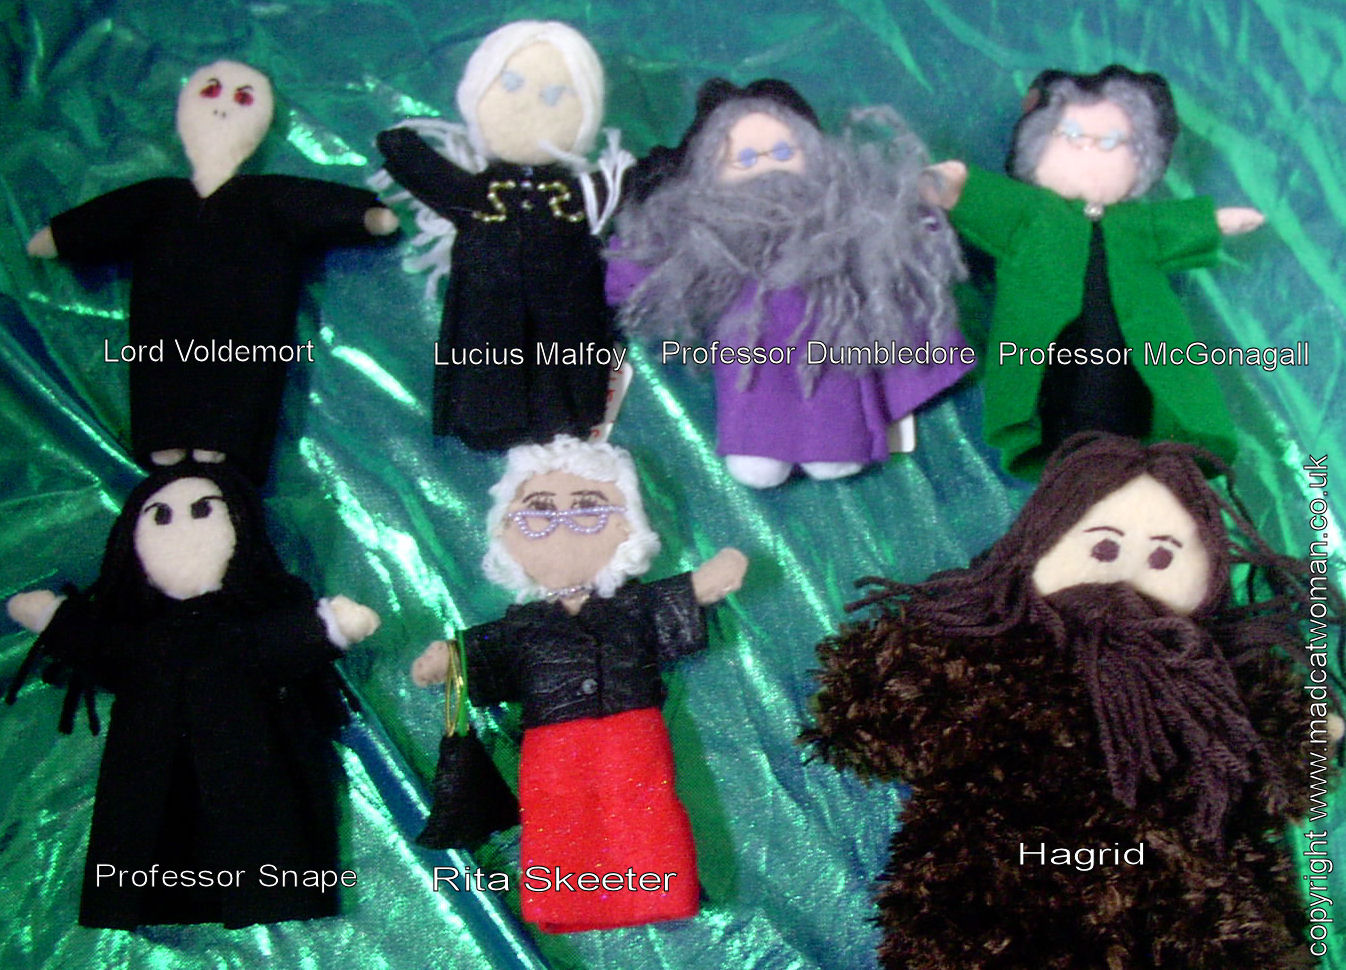 Harry Potter-style dolls by sdys15453